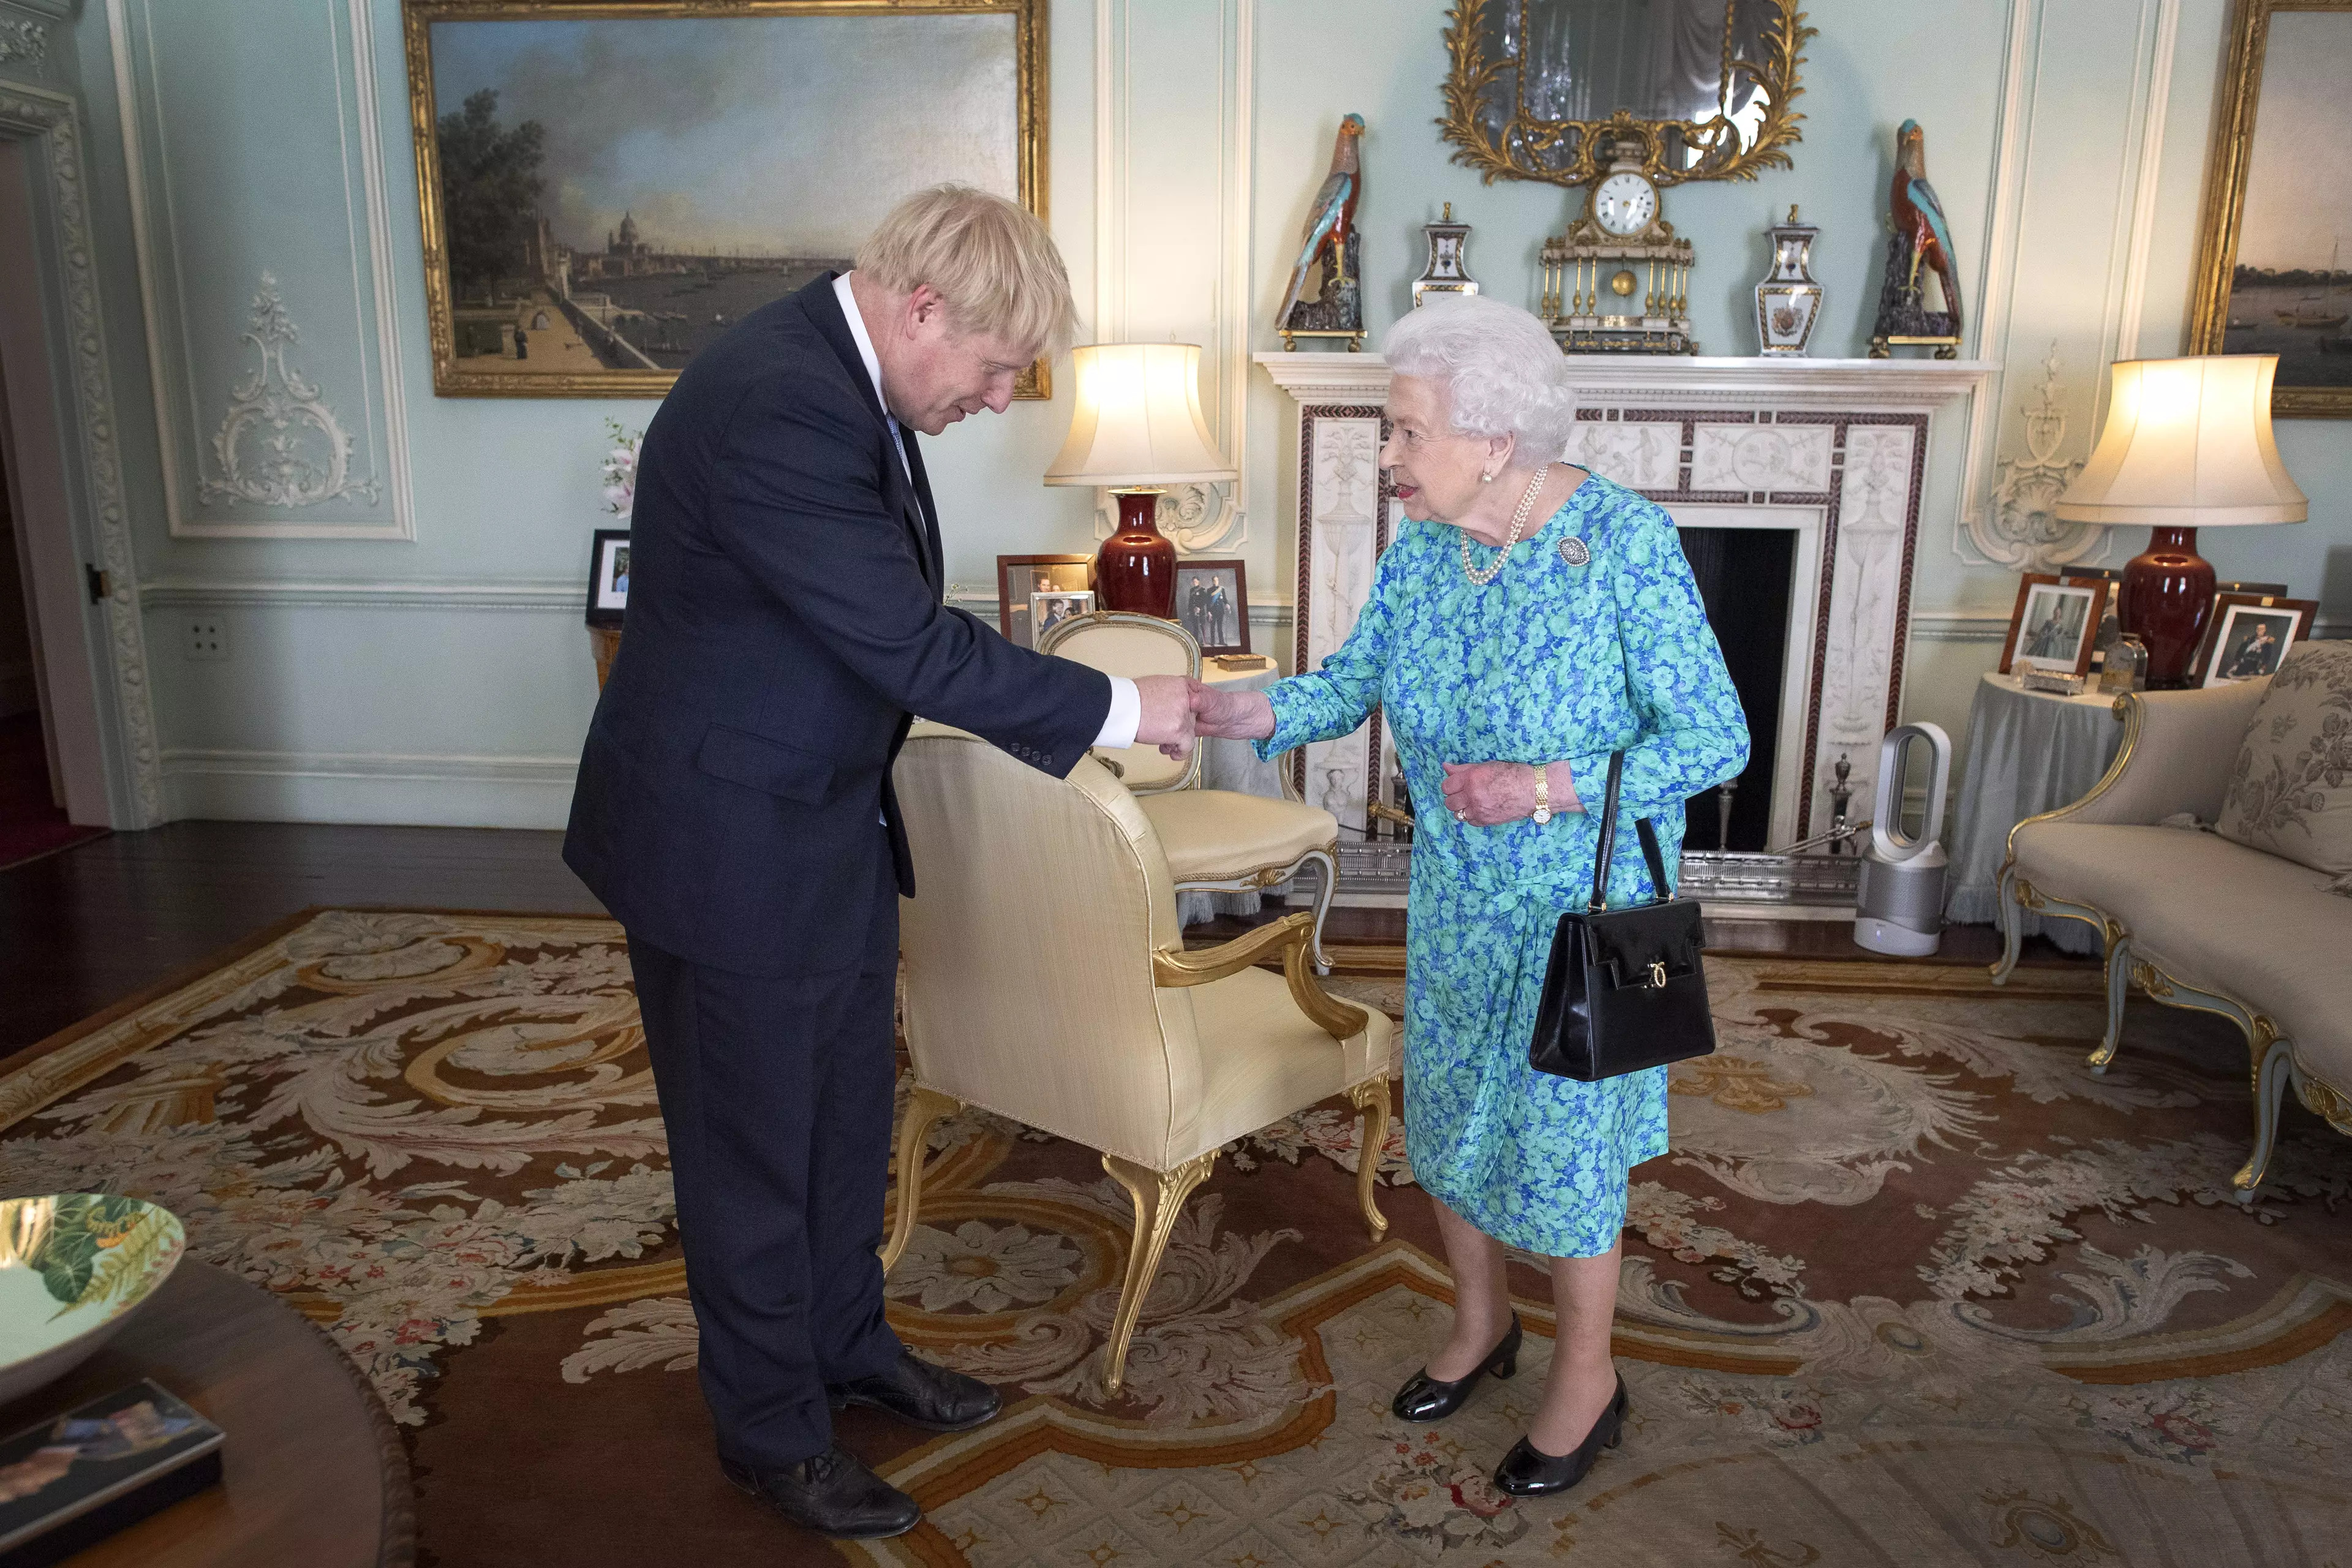 Boris Johnson with the Queen at Buckingham Palace last month (